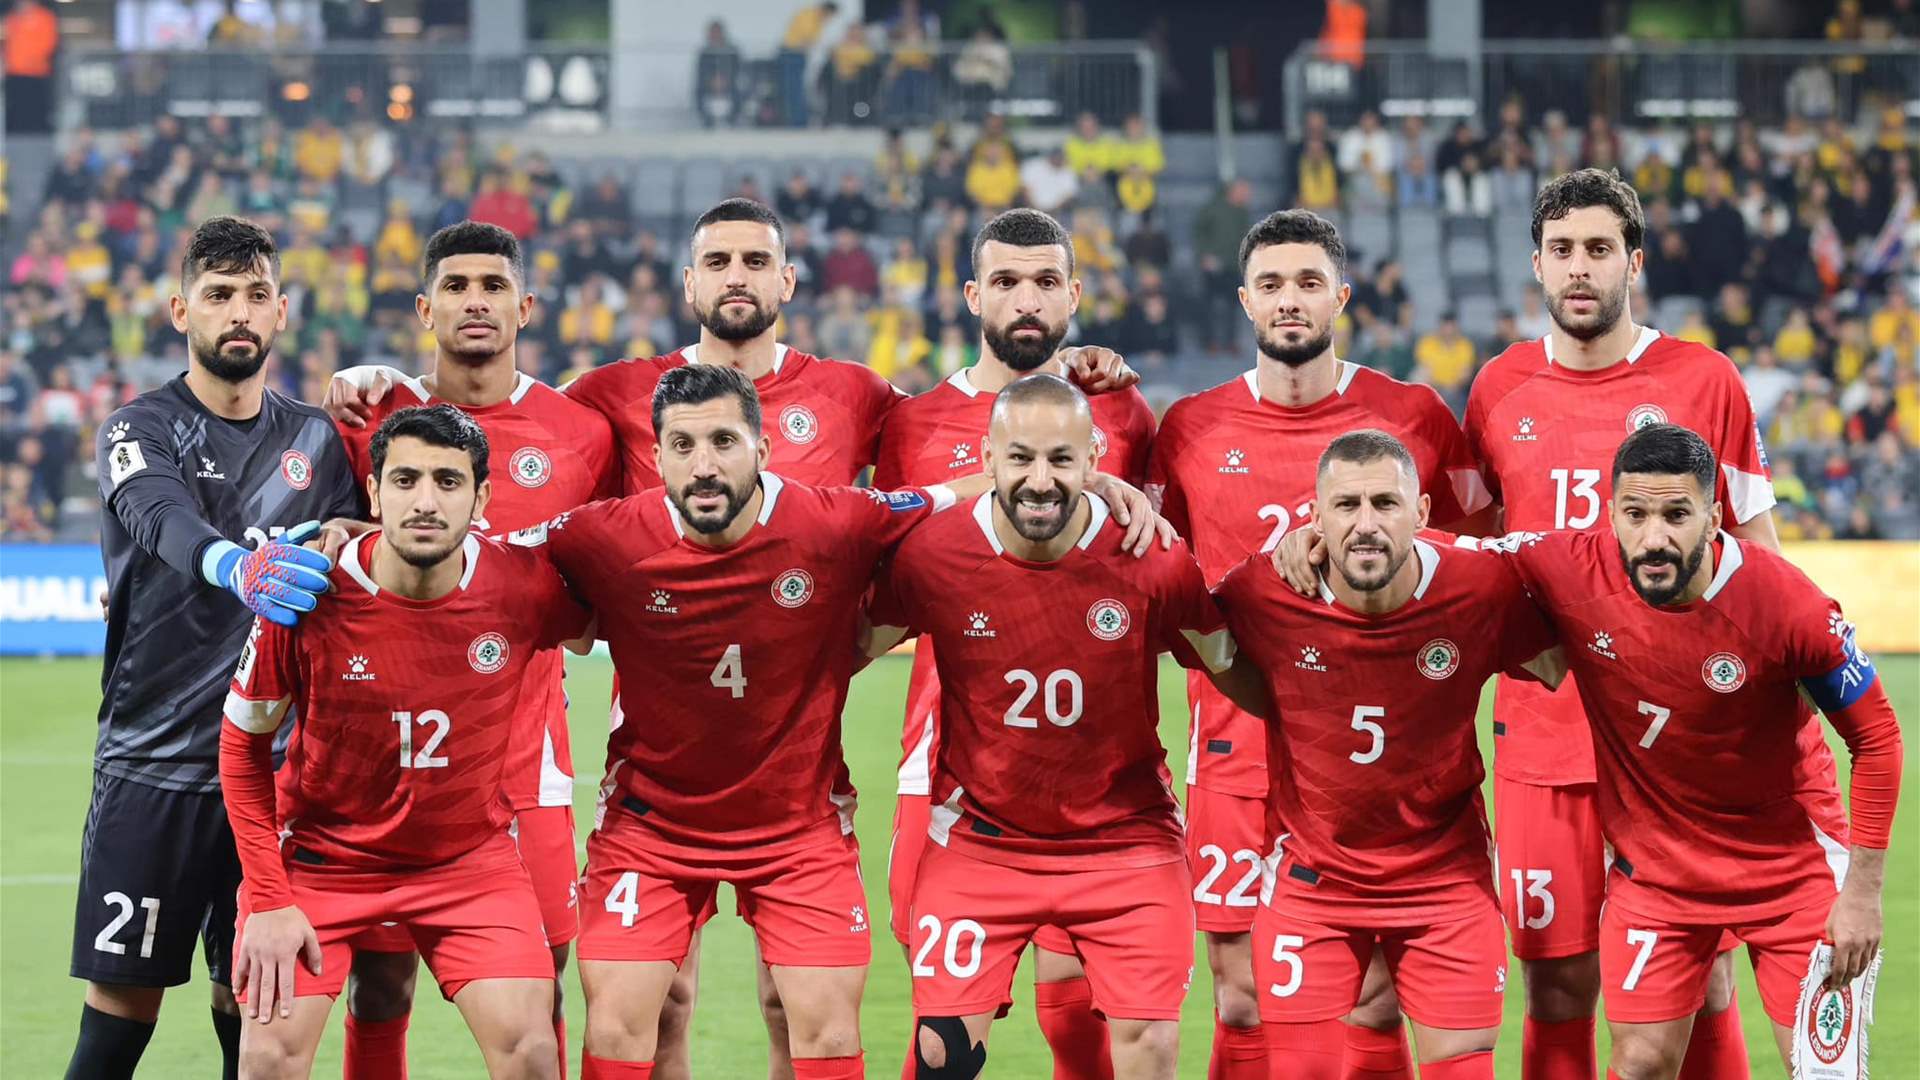 2026 FIFA World Cup qualifiers: The match&#39;s first half ends with the Australian team leading the Lebanese team 1-0